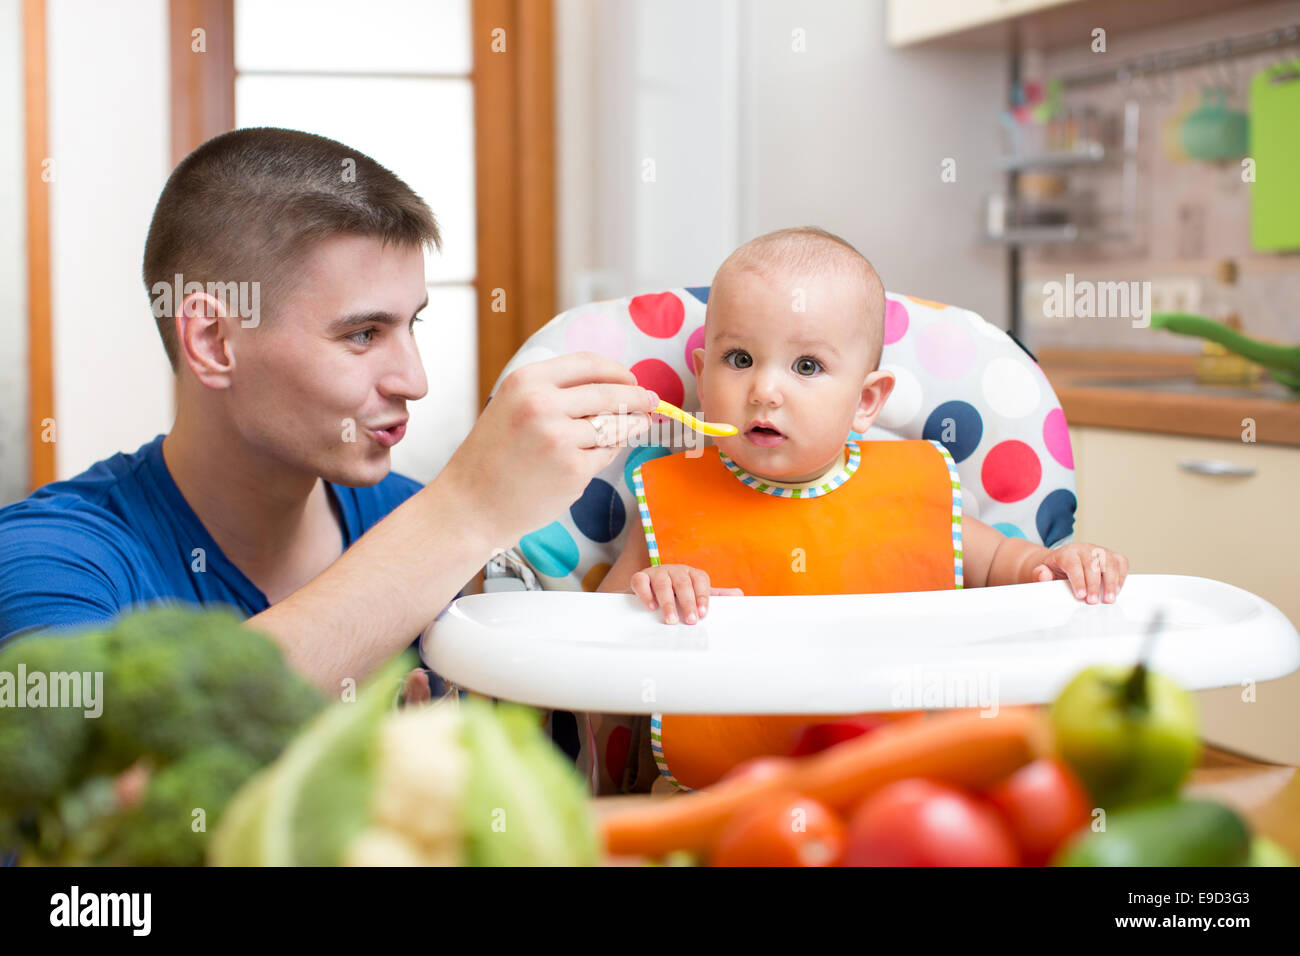 young dad feeding his baby at kitchen Stock Photo